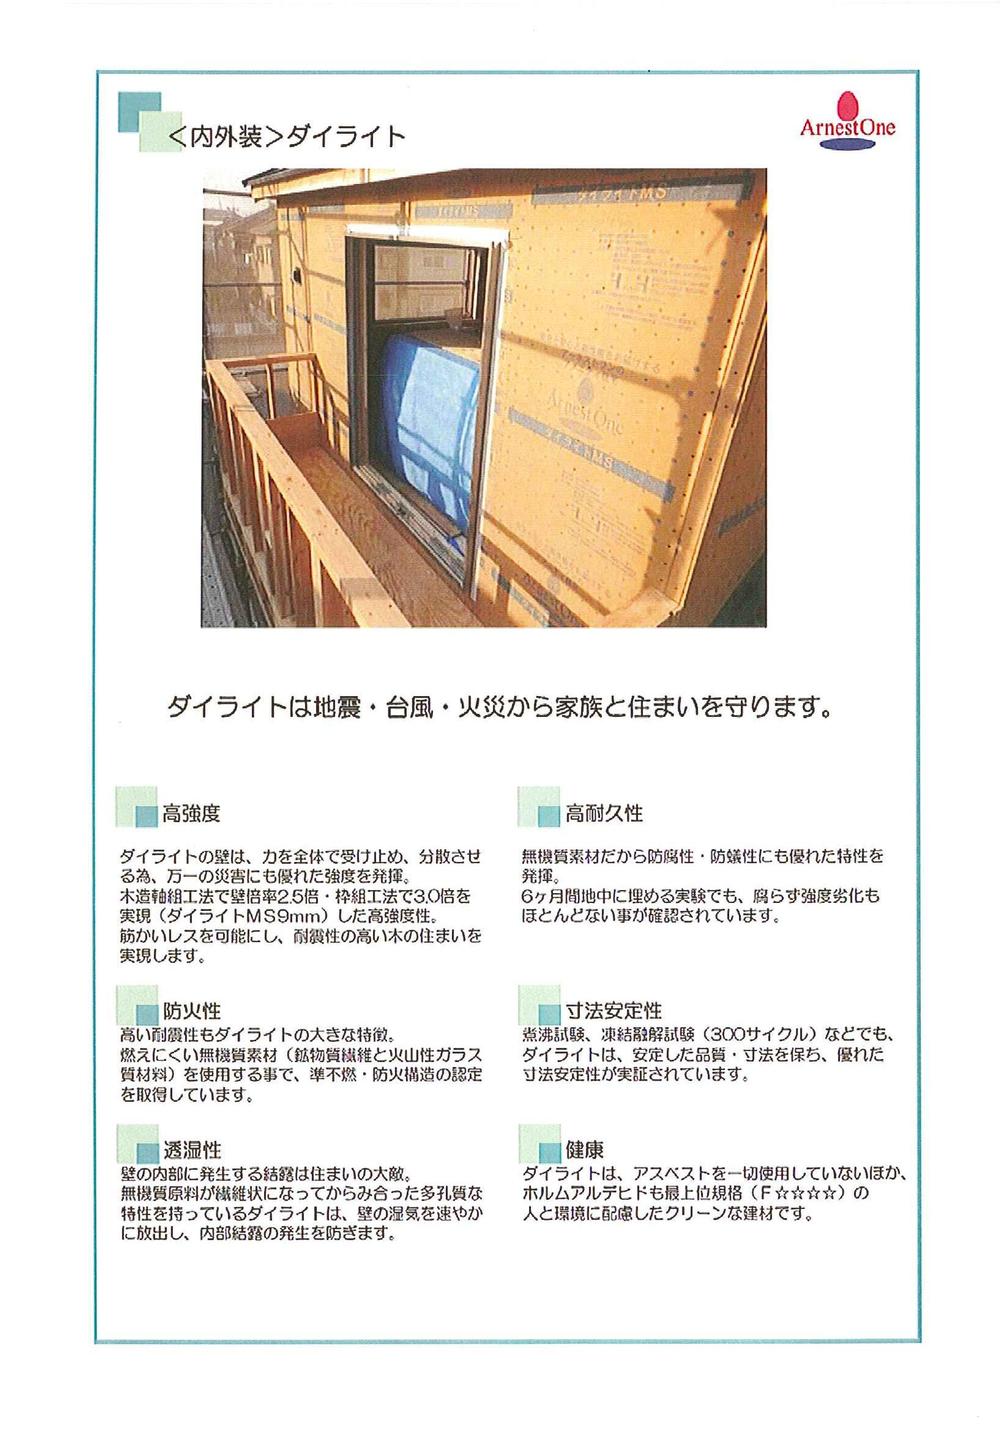 Construction ・ Construction method ・ specification. Strong Dairaito method to earthquake! 